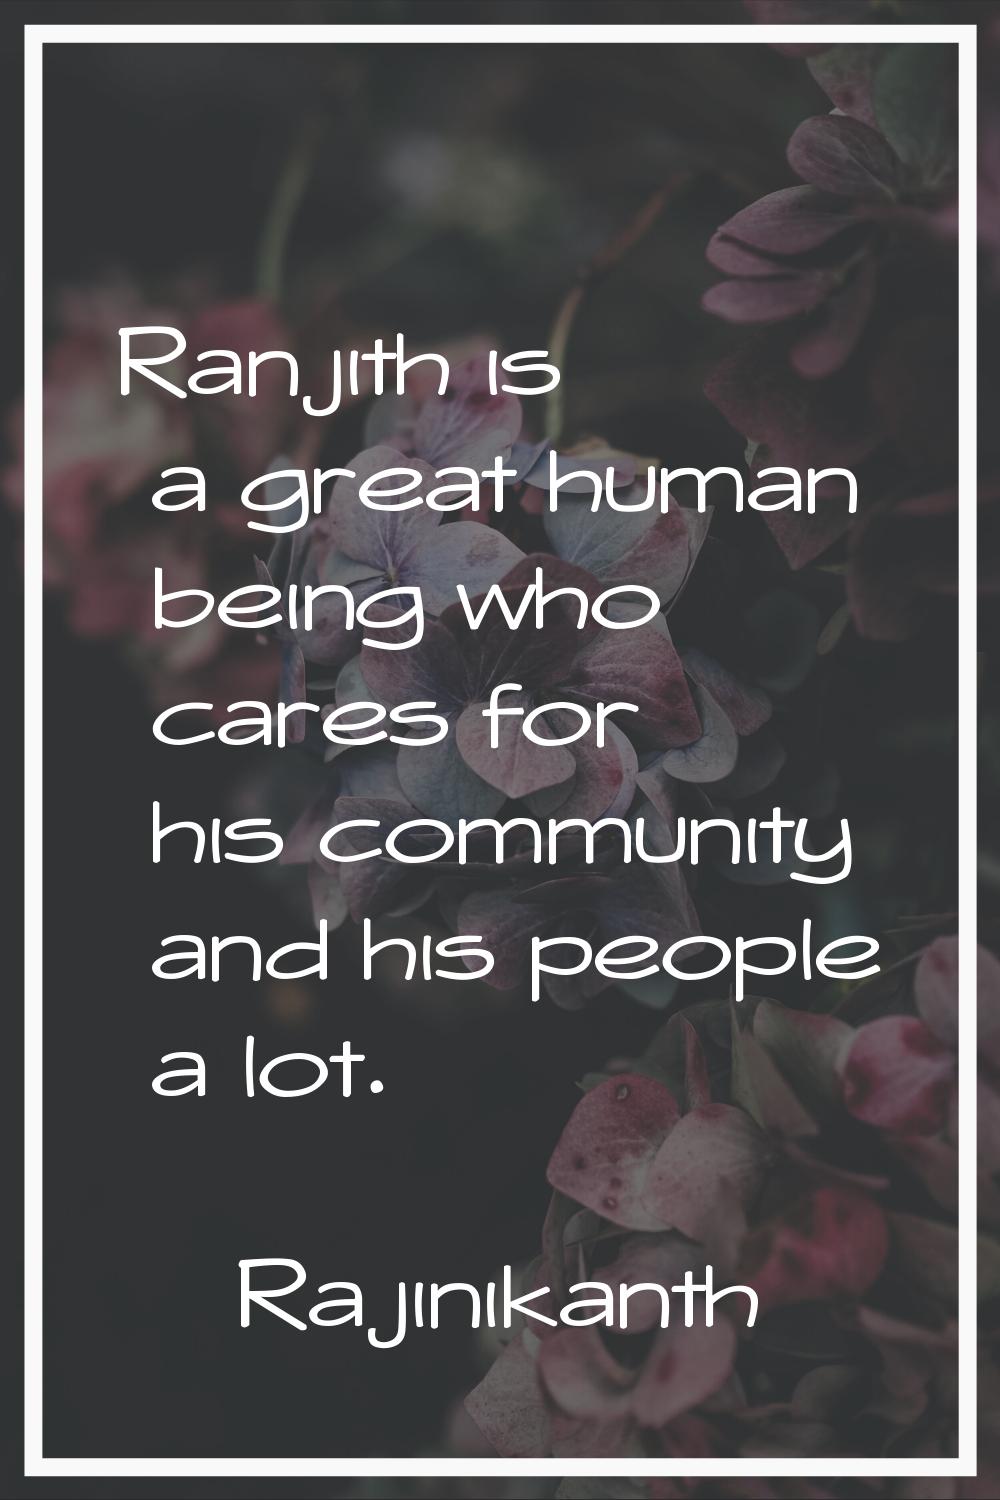 Ranjith is a great human being who cares for his community and his people a lot.